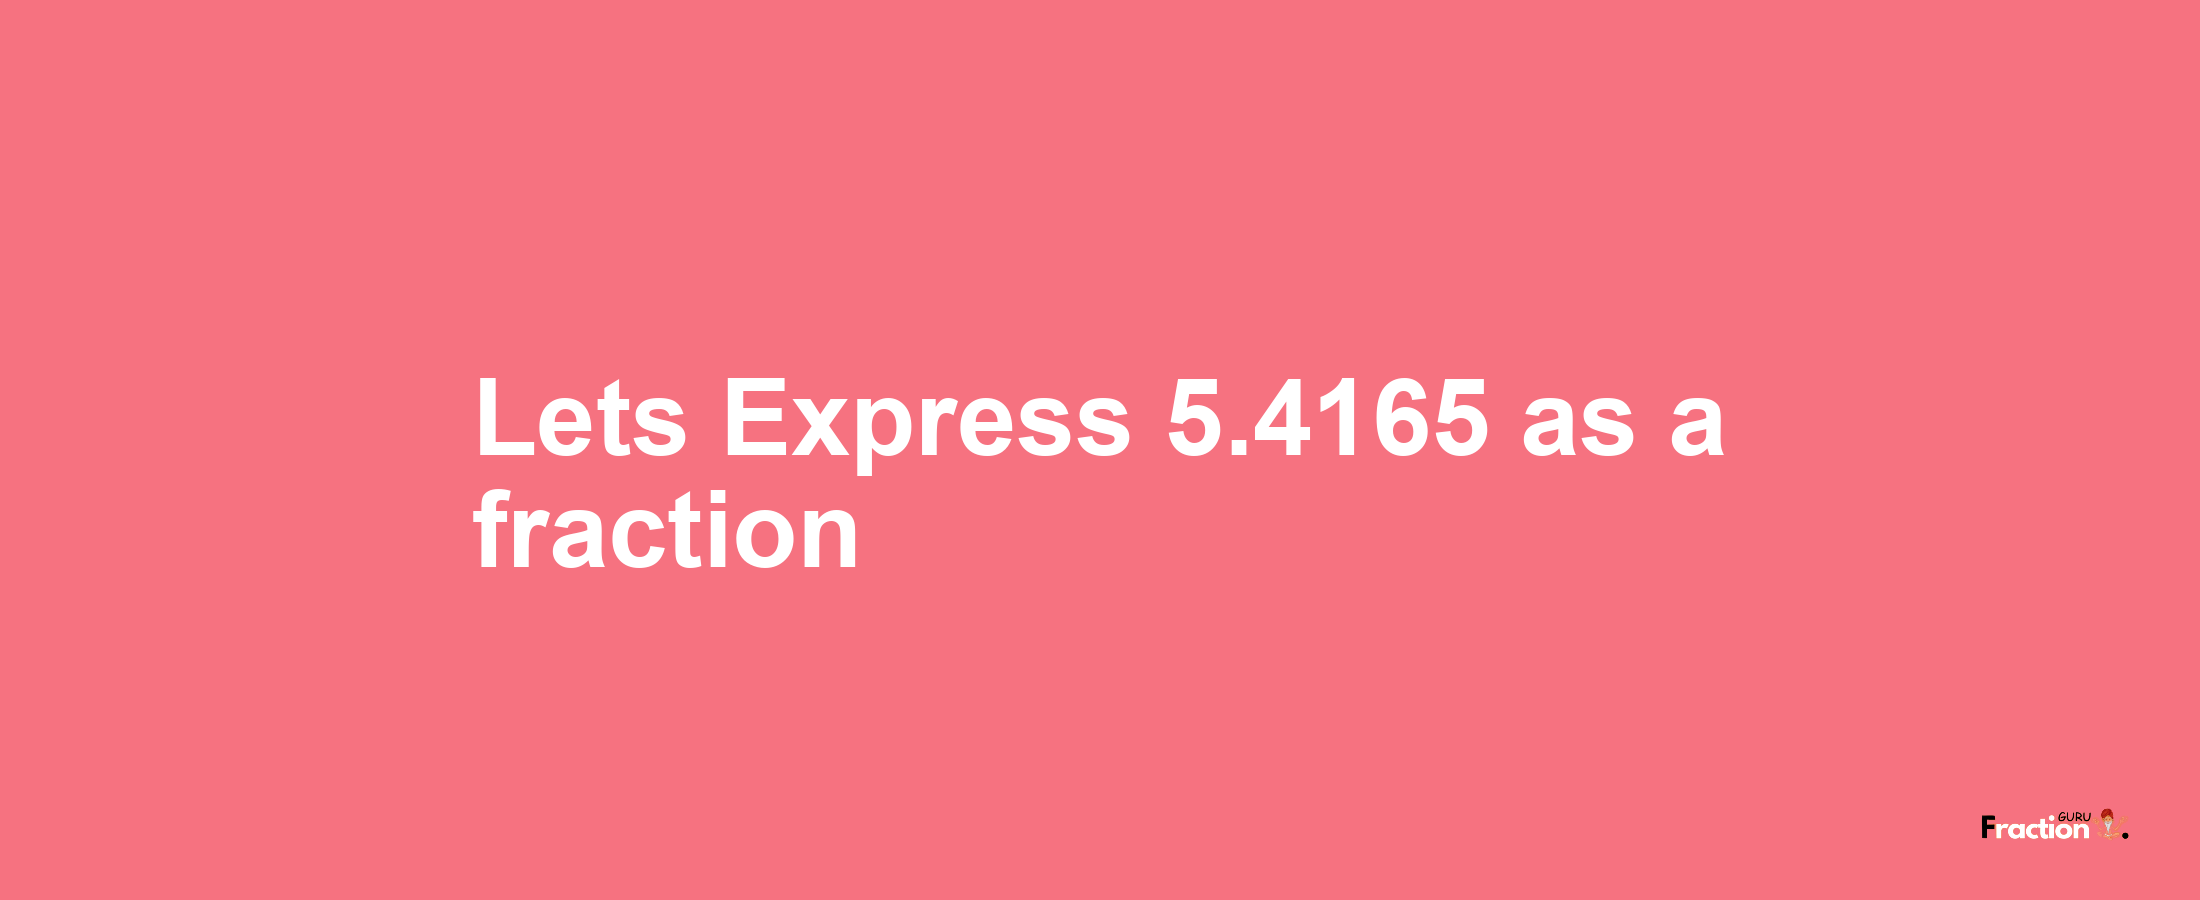 Lets Express 5.4165 as afraction